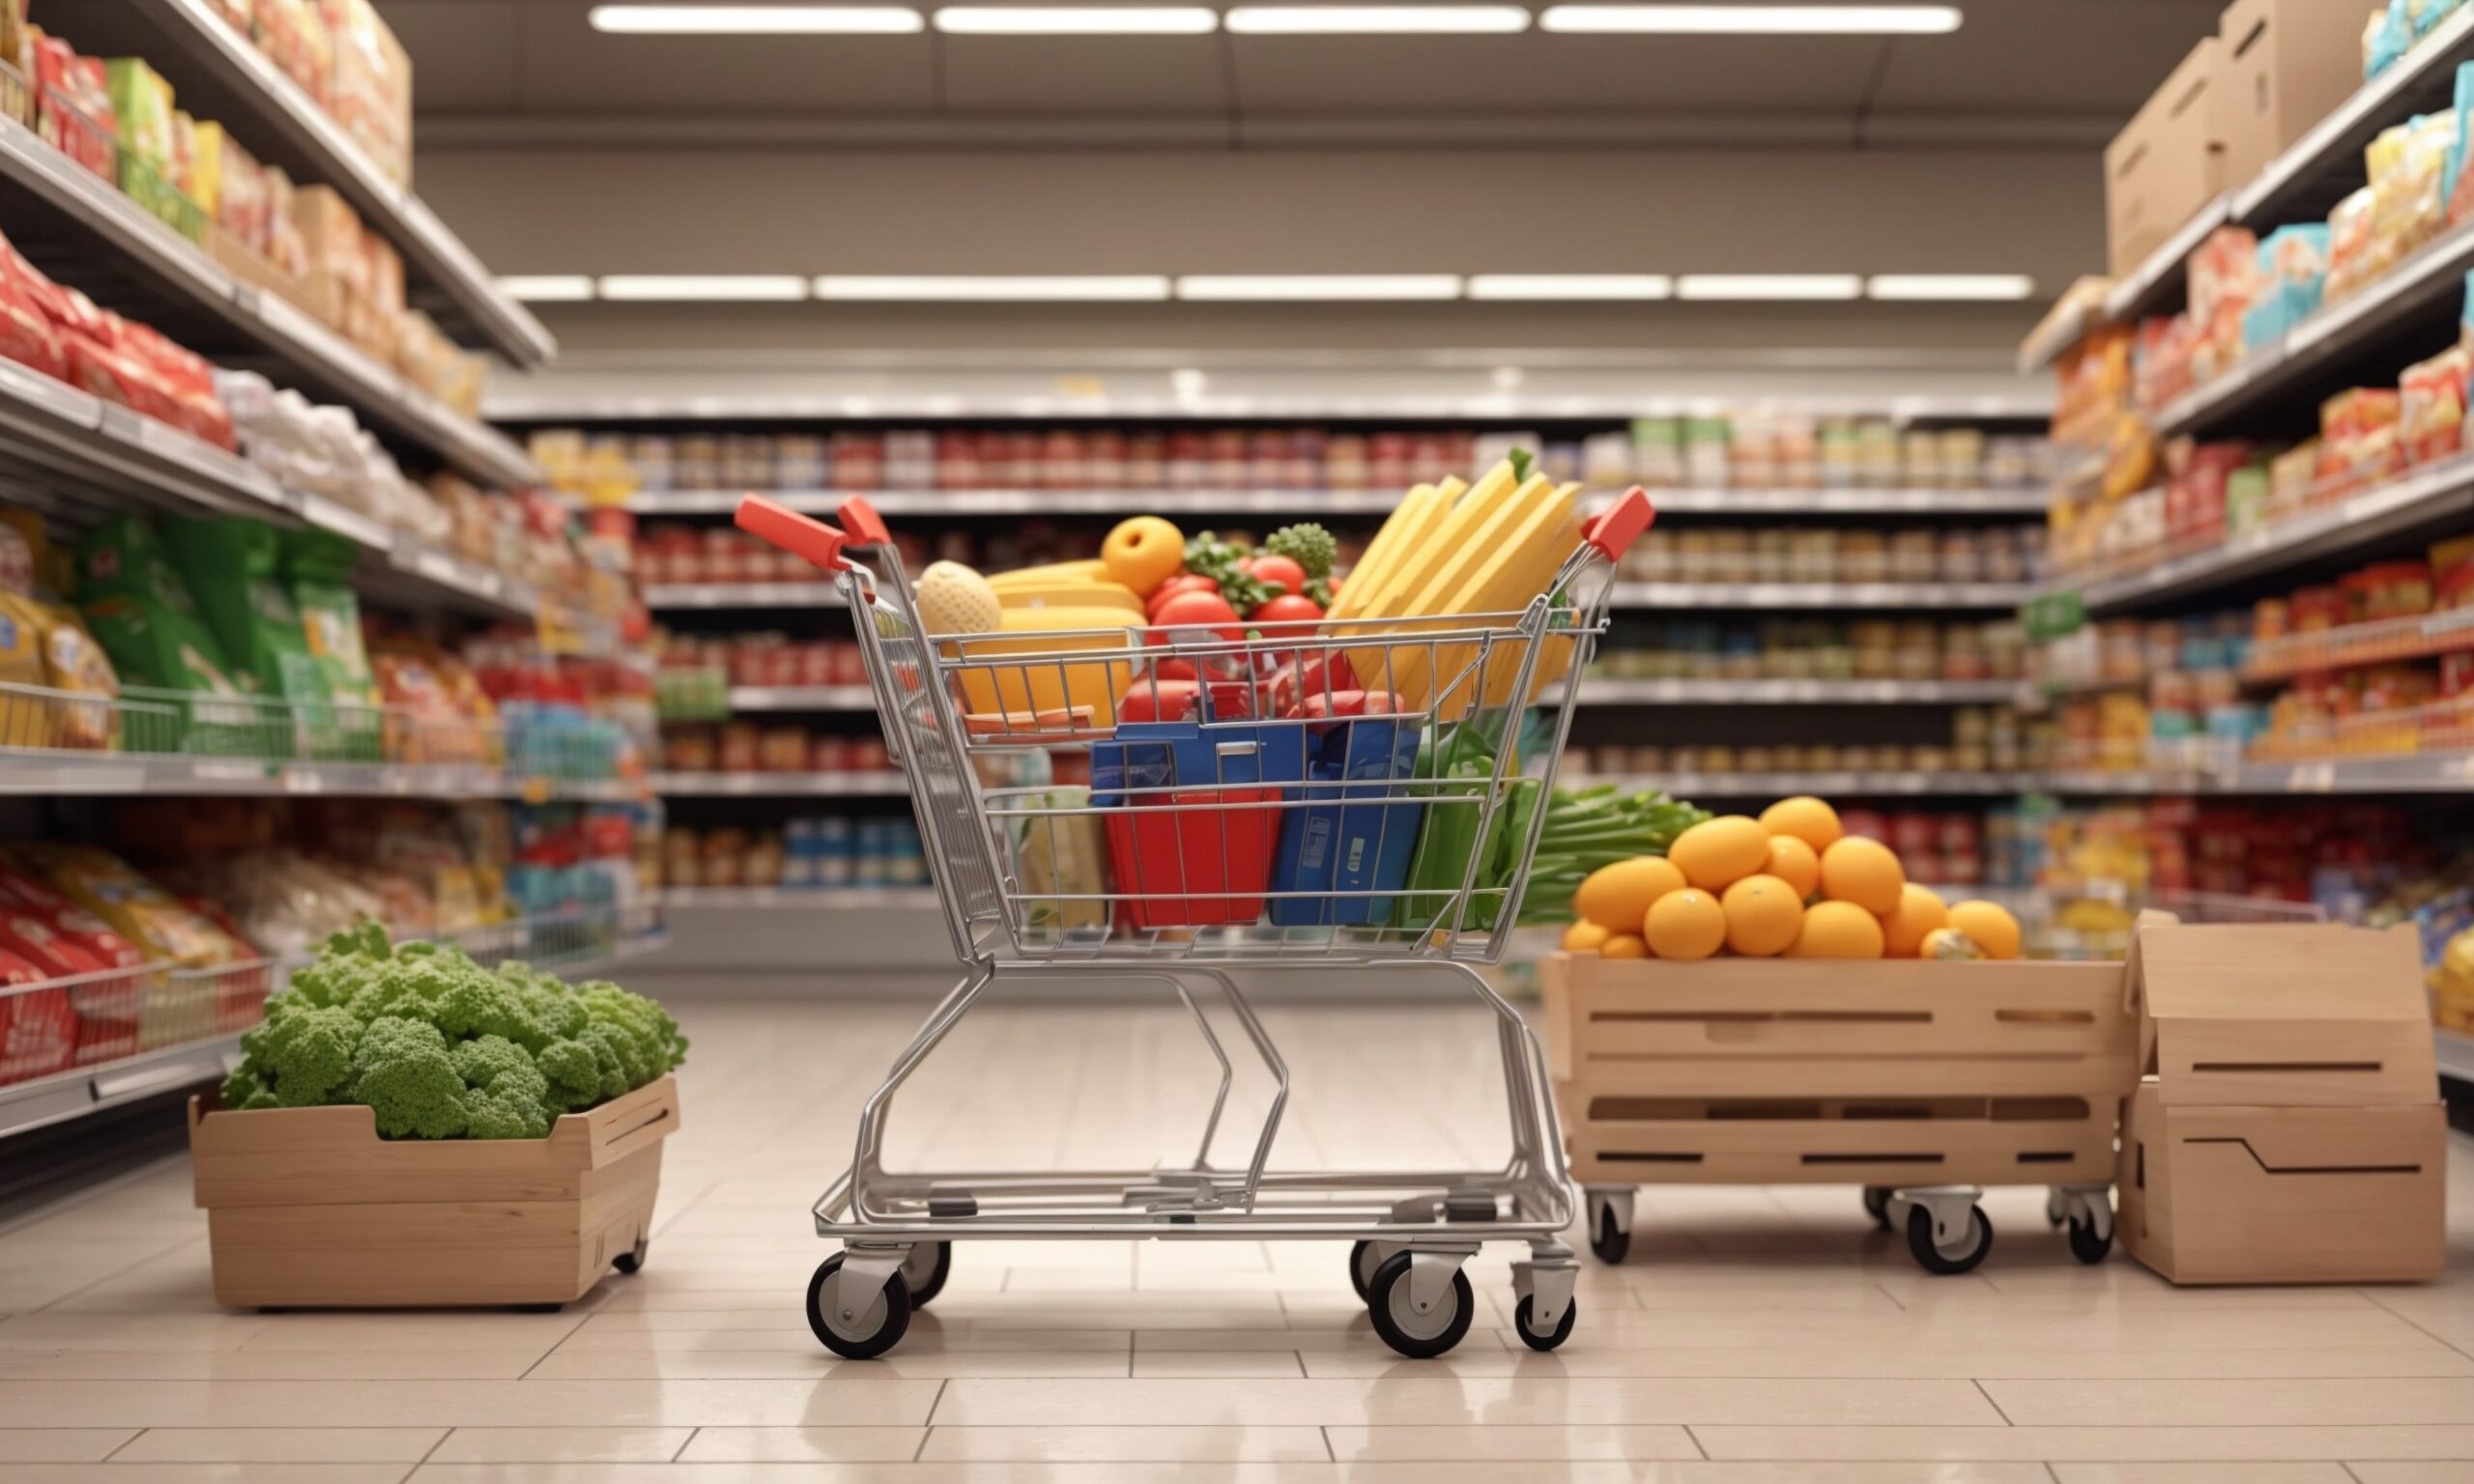 A small toy shopping cart is filled with toy foods, including baguettes and produce. There's a wooden crate of oranges sitting next to it. The scene is set in a grocery store aisle.